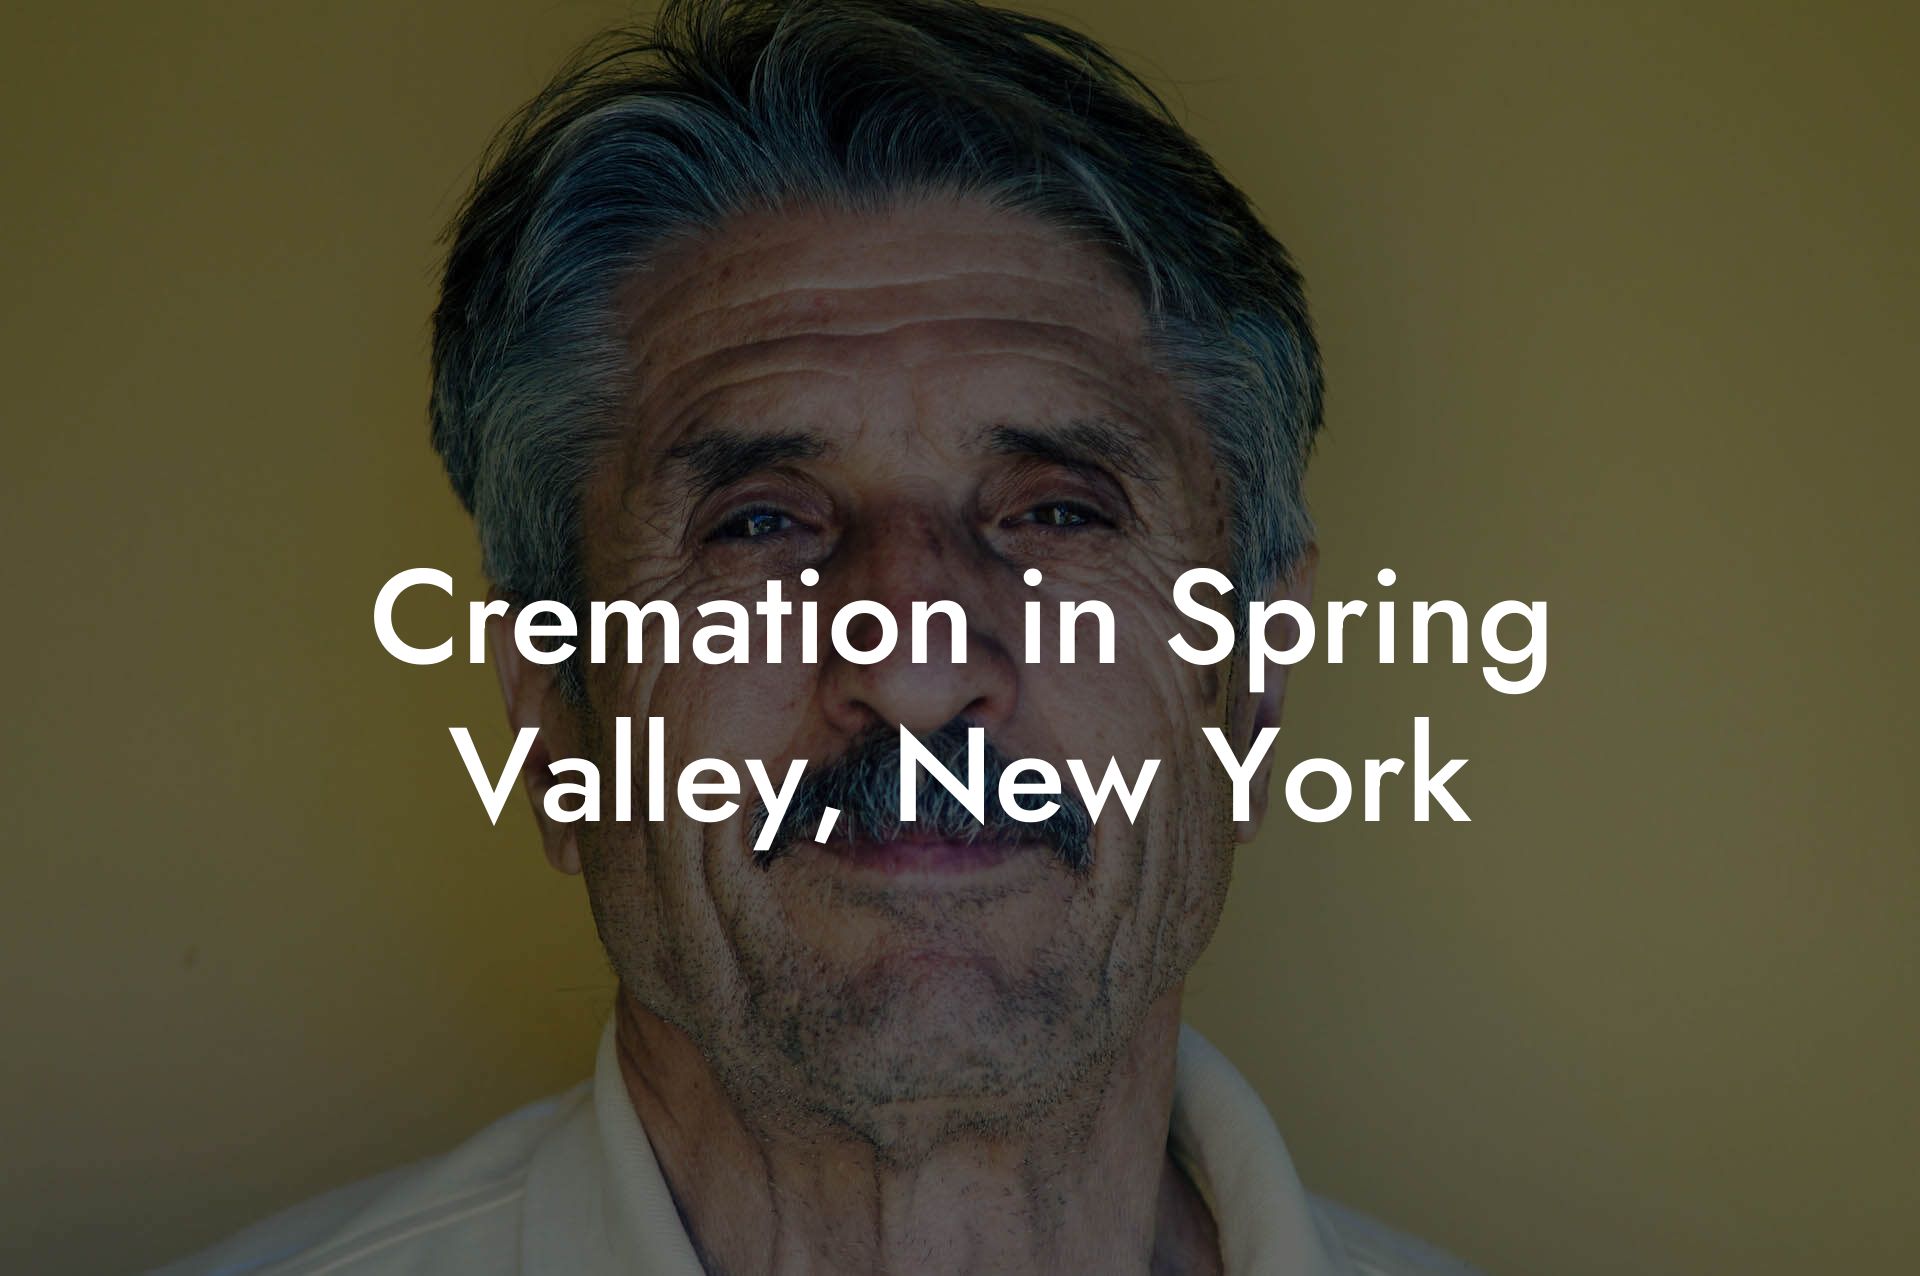 Cremation in Spring Valley, New York